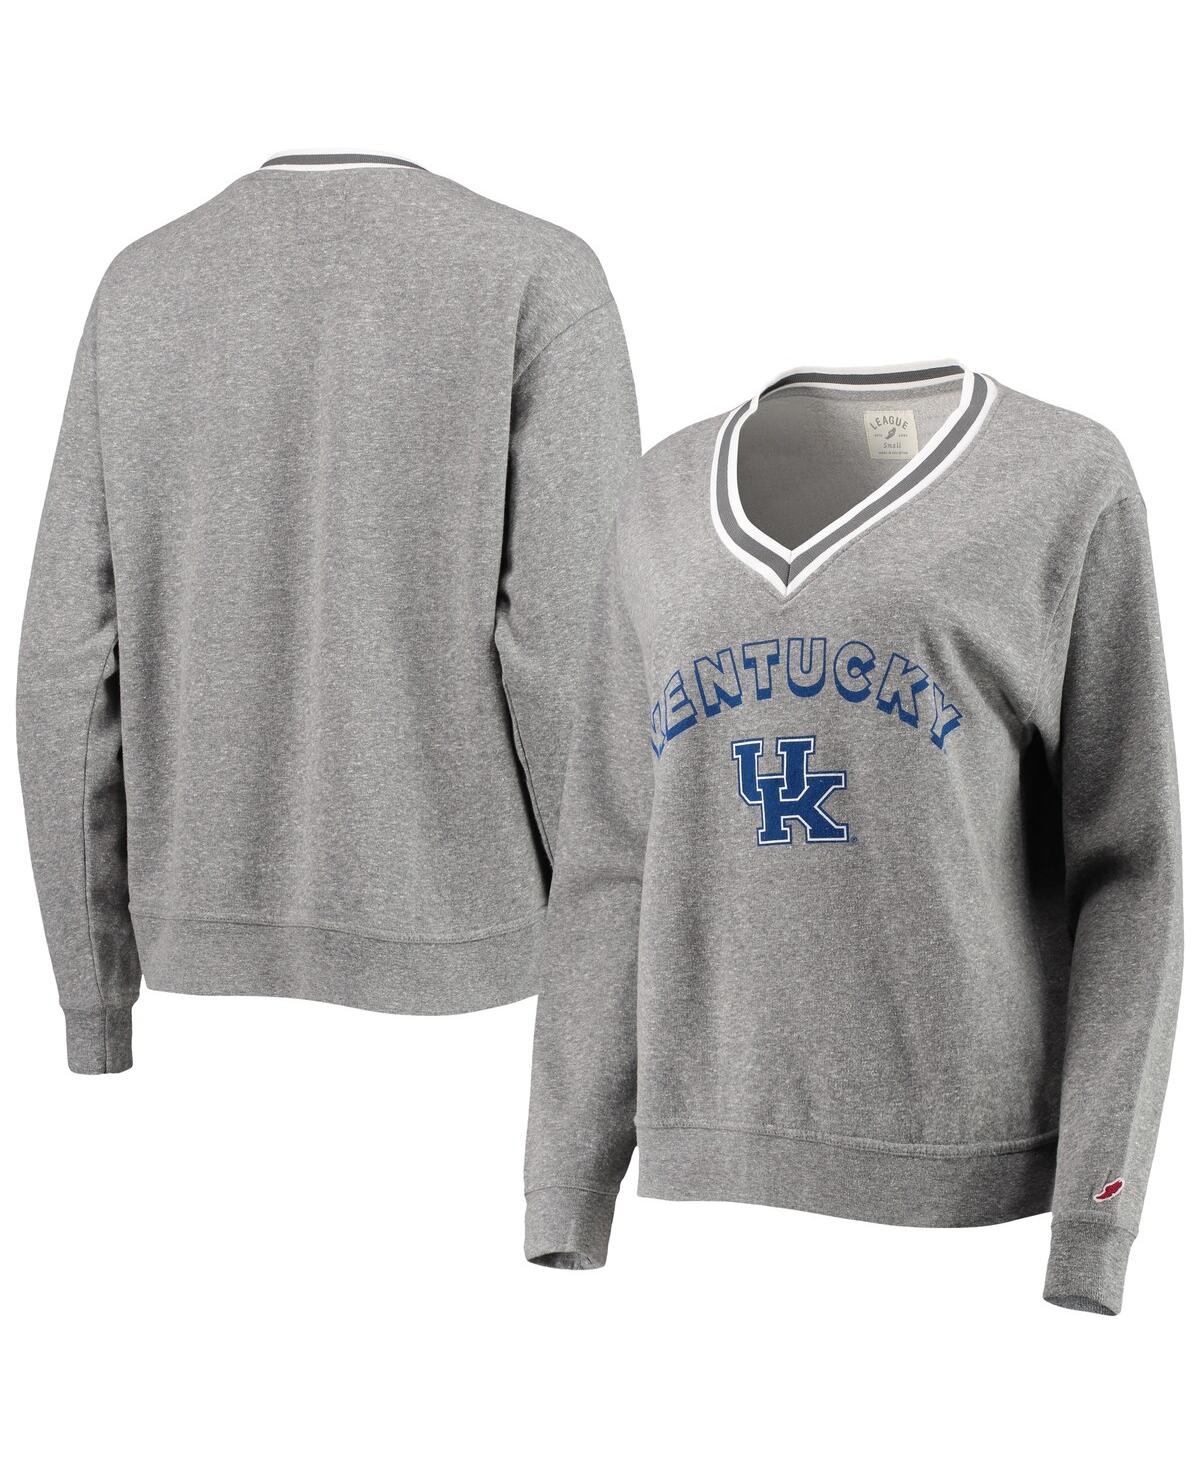 Women's League Collegiate Wear Heathered Gray Kentucky Wildcats Victory Springs Tri-Blend V-Neck Pullover Sweatshirt - Heathered Gray